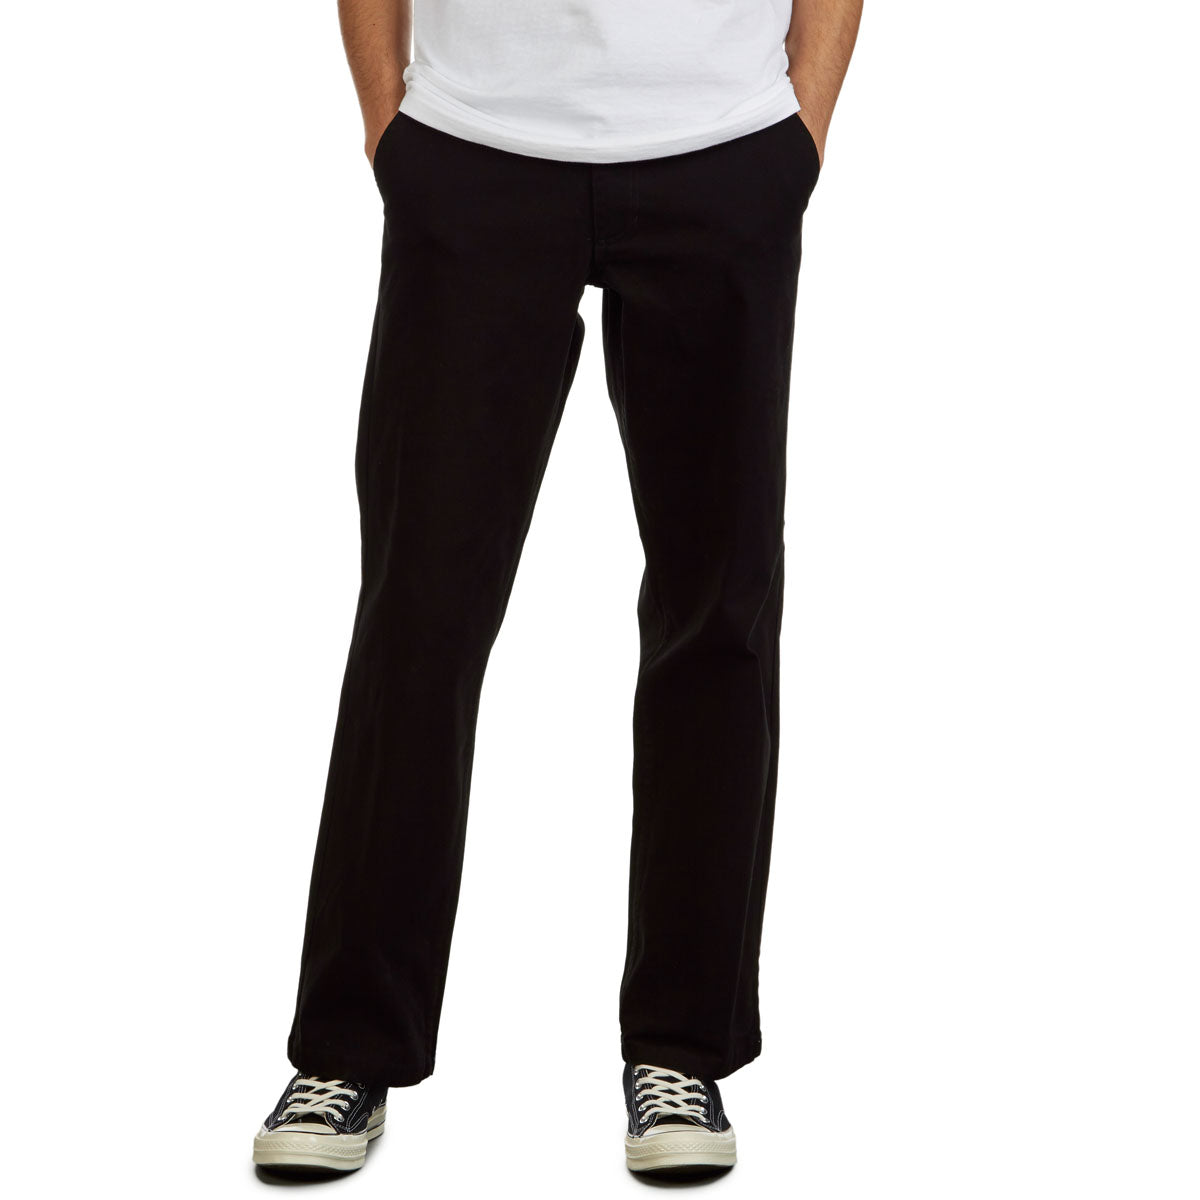 CCS Standard Plus Relaxed Chino Pants - Black image 1